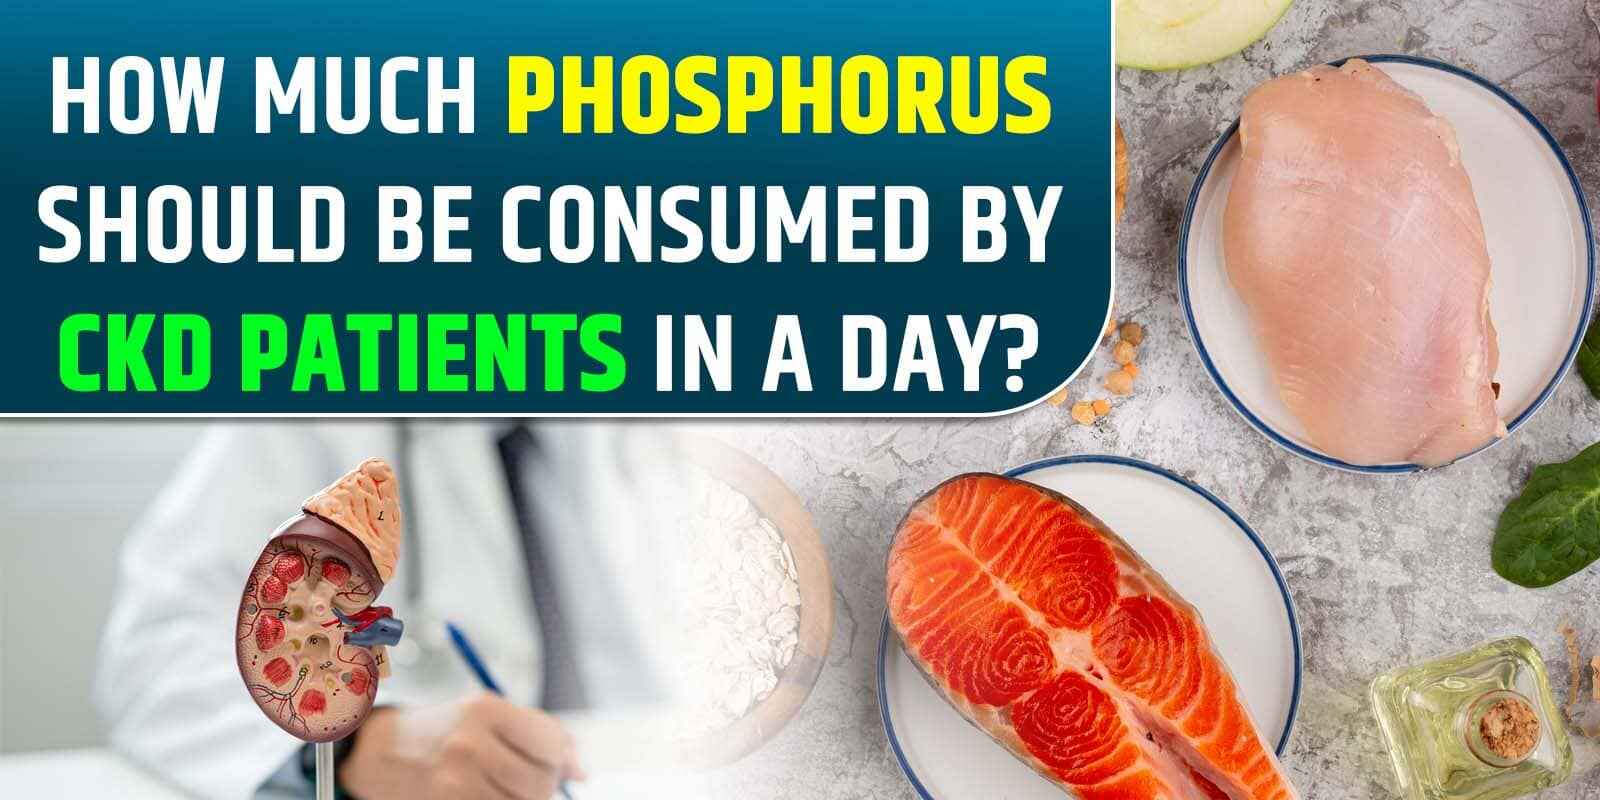 How much phosphorus should be consumed by CKD patients in a day?